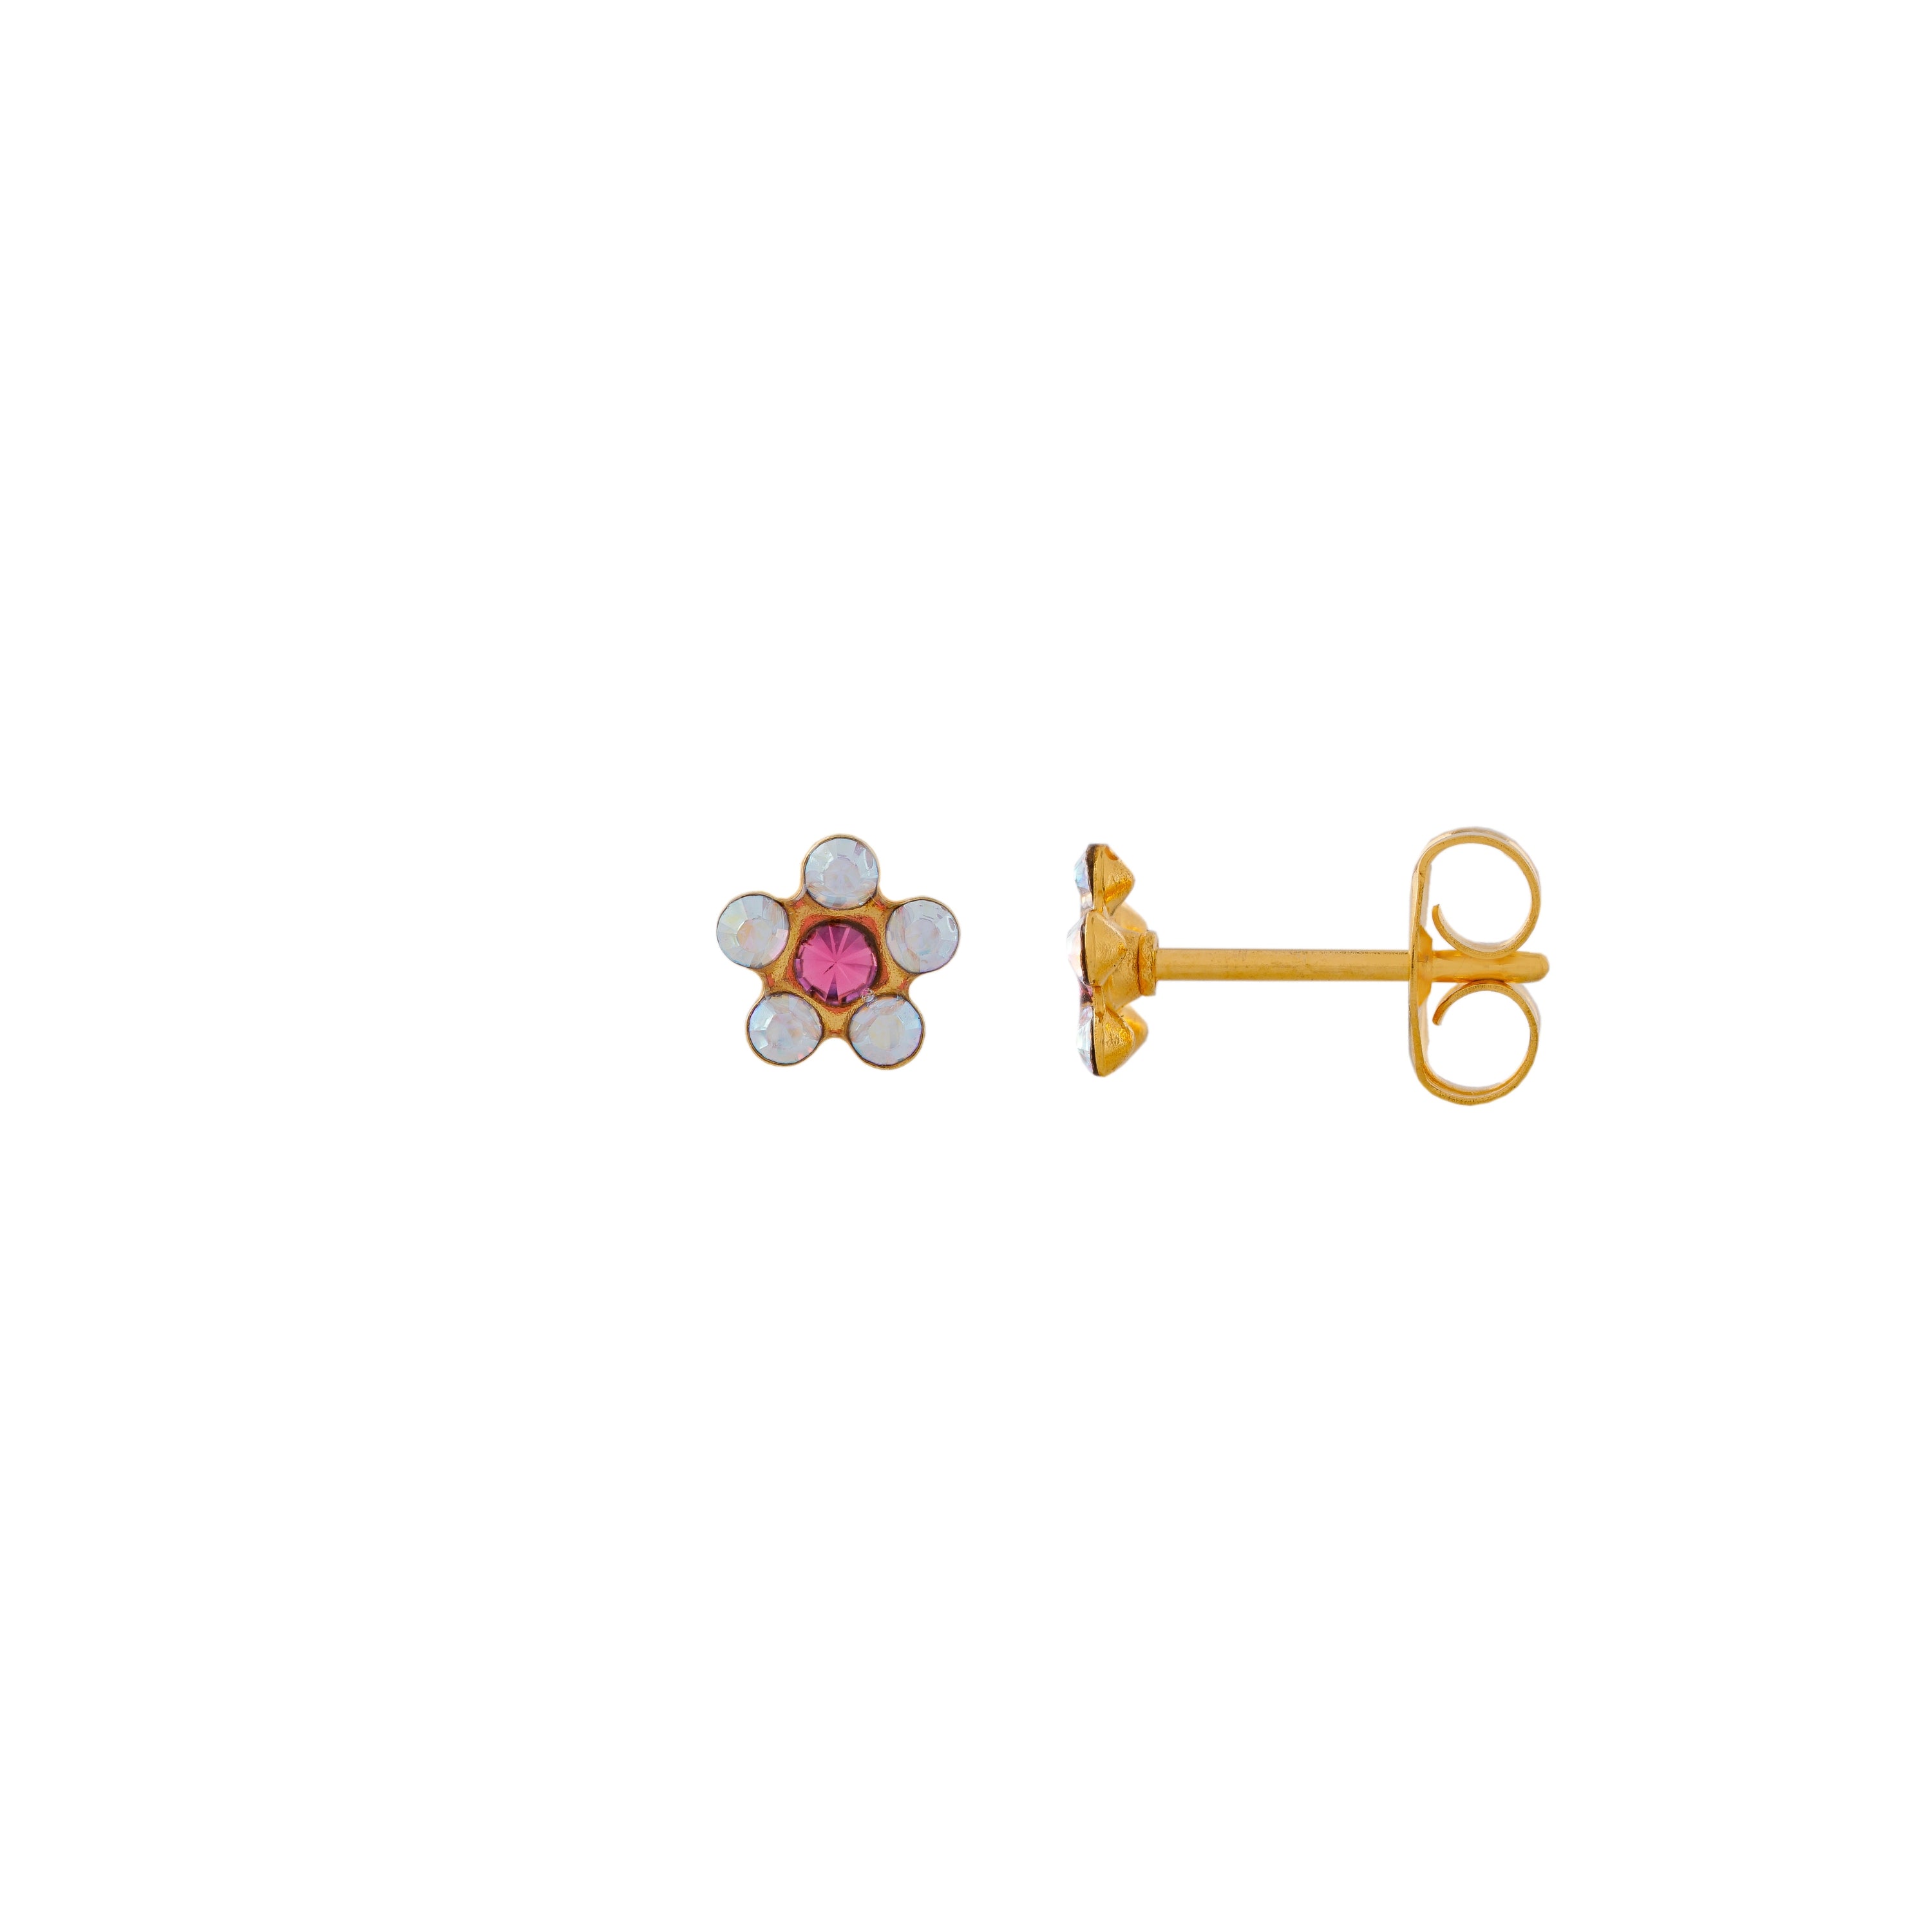 Daisy Ab Crystal-Rose 24K Pure Gold Plated Ear Studs | MADE IN USA | Ideal for everyday wear